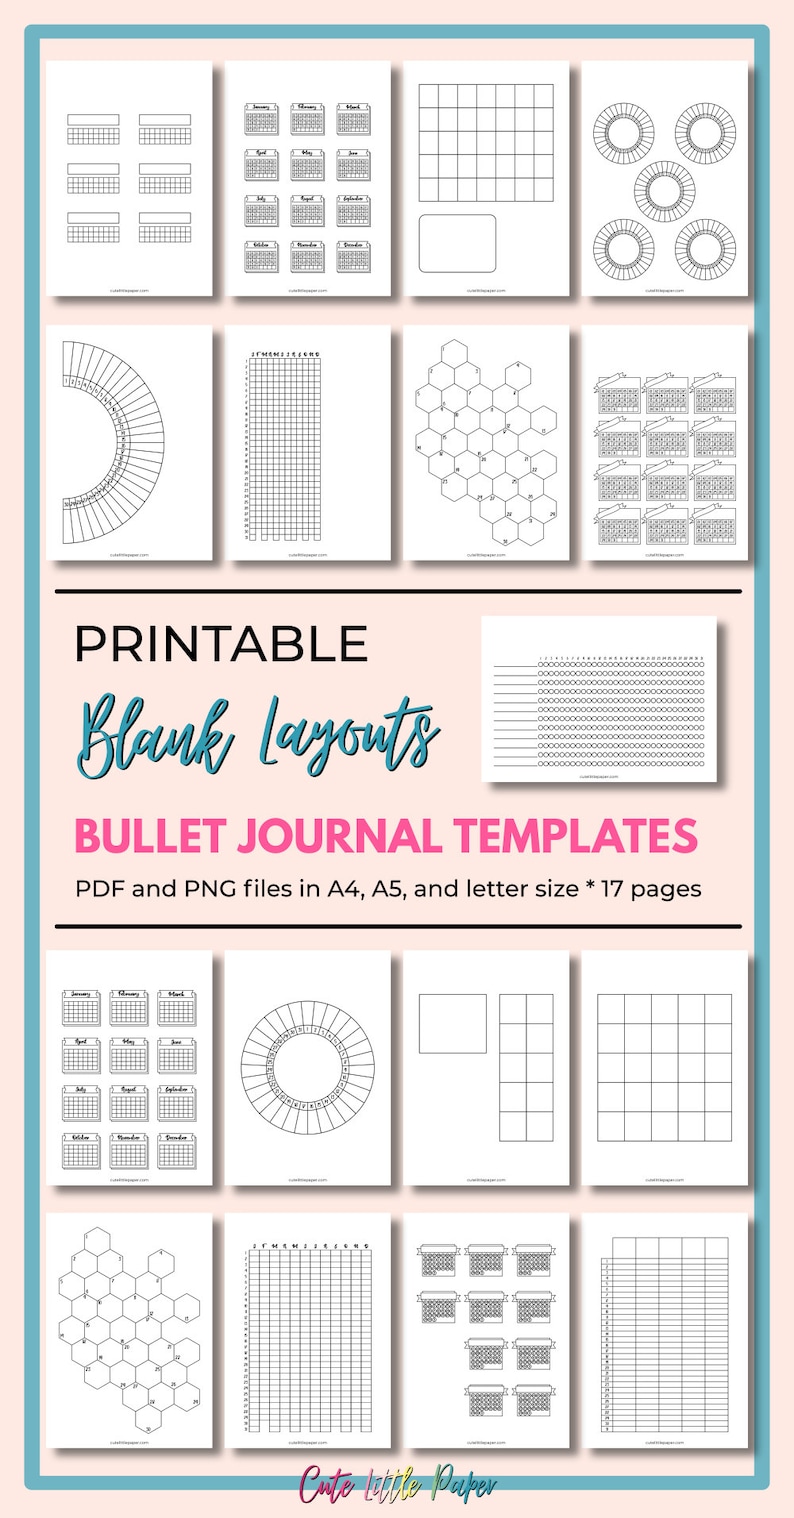 Printable Bullet Journal Templates. Blank Bujo Layouts and - Etsy